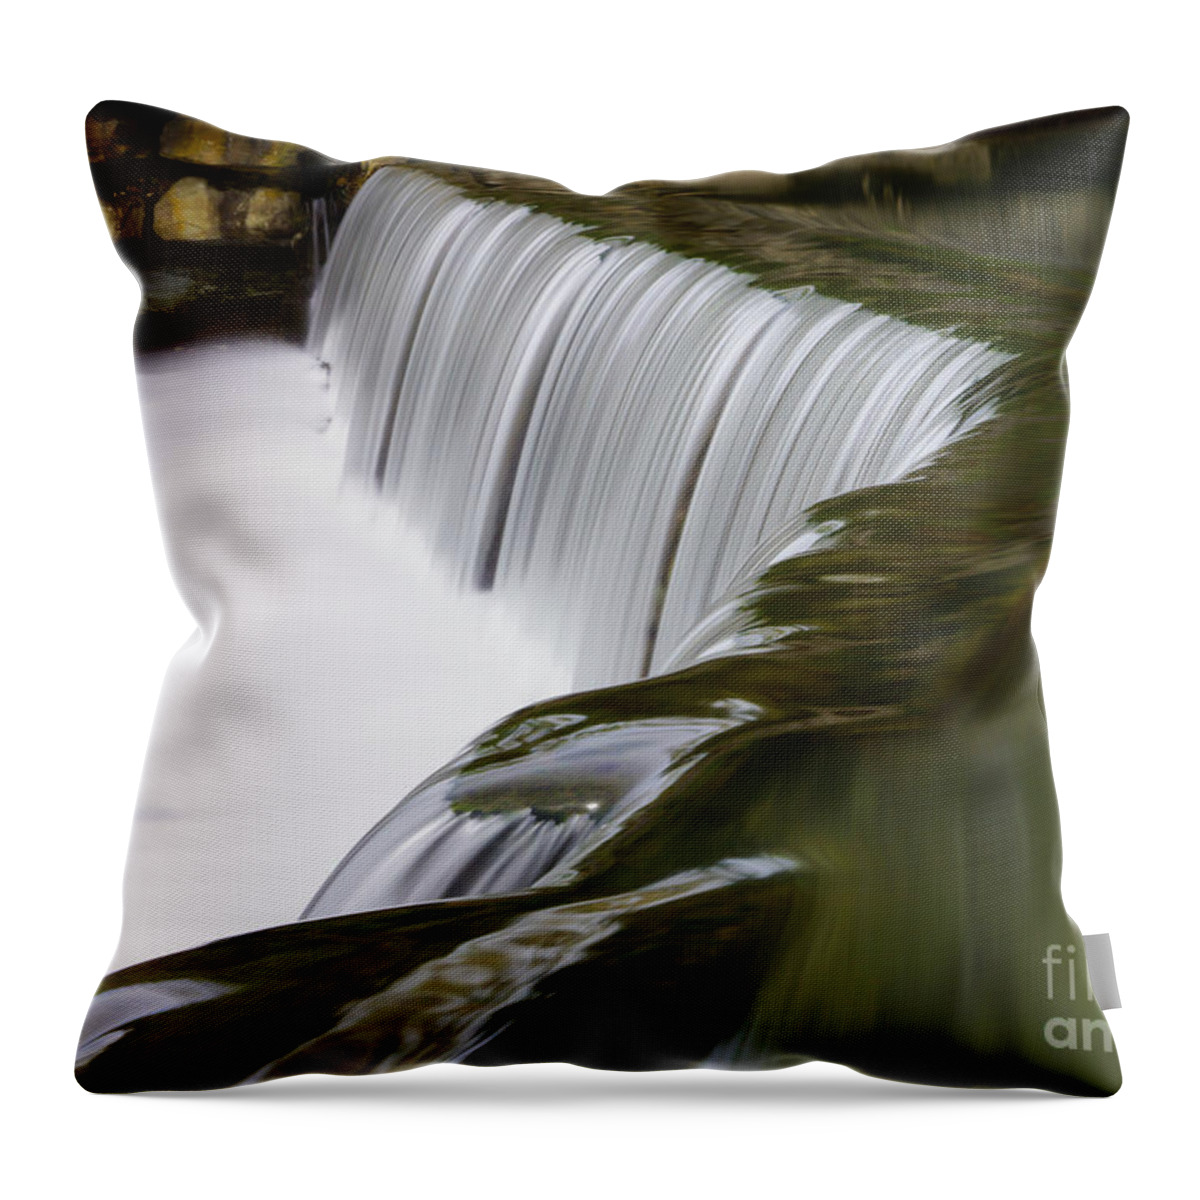 America Throw Pillow featuring the photograph Over The Edge by Jennifer White